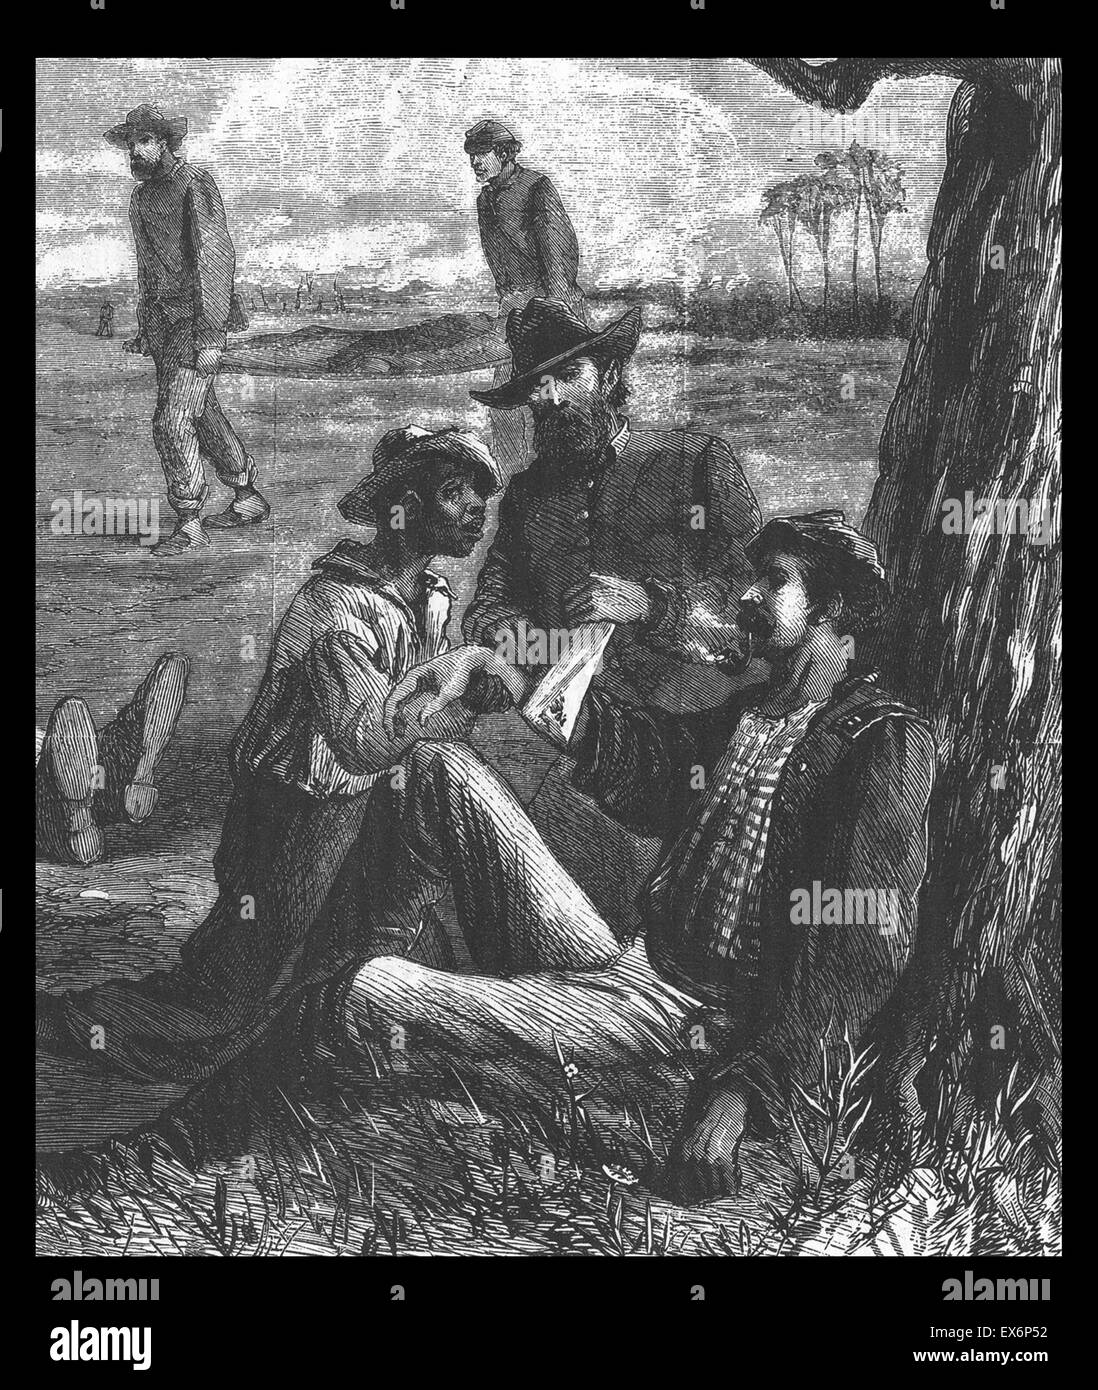 Illustration of an African American man assisting a medical officer on the battlefield, Harper's Weekly, August 20, 1864 Stock Photo